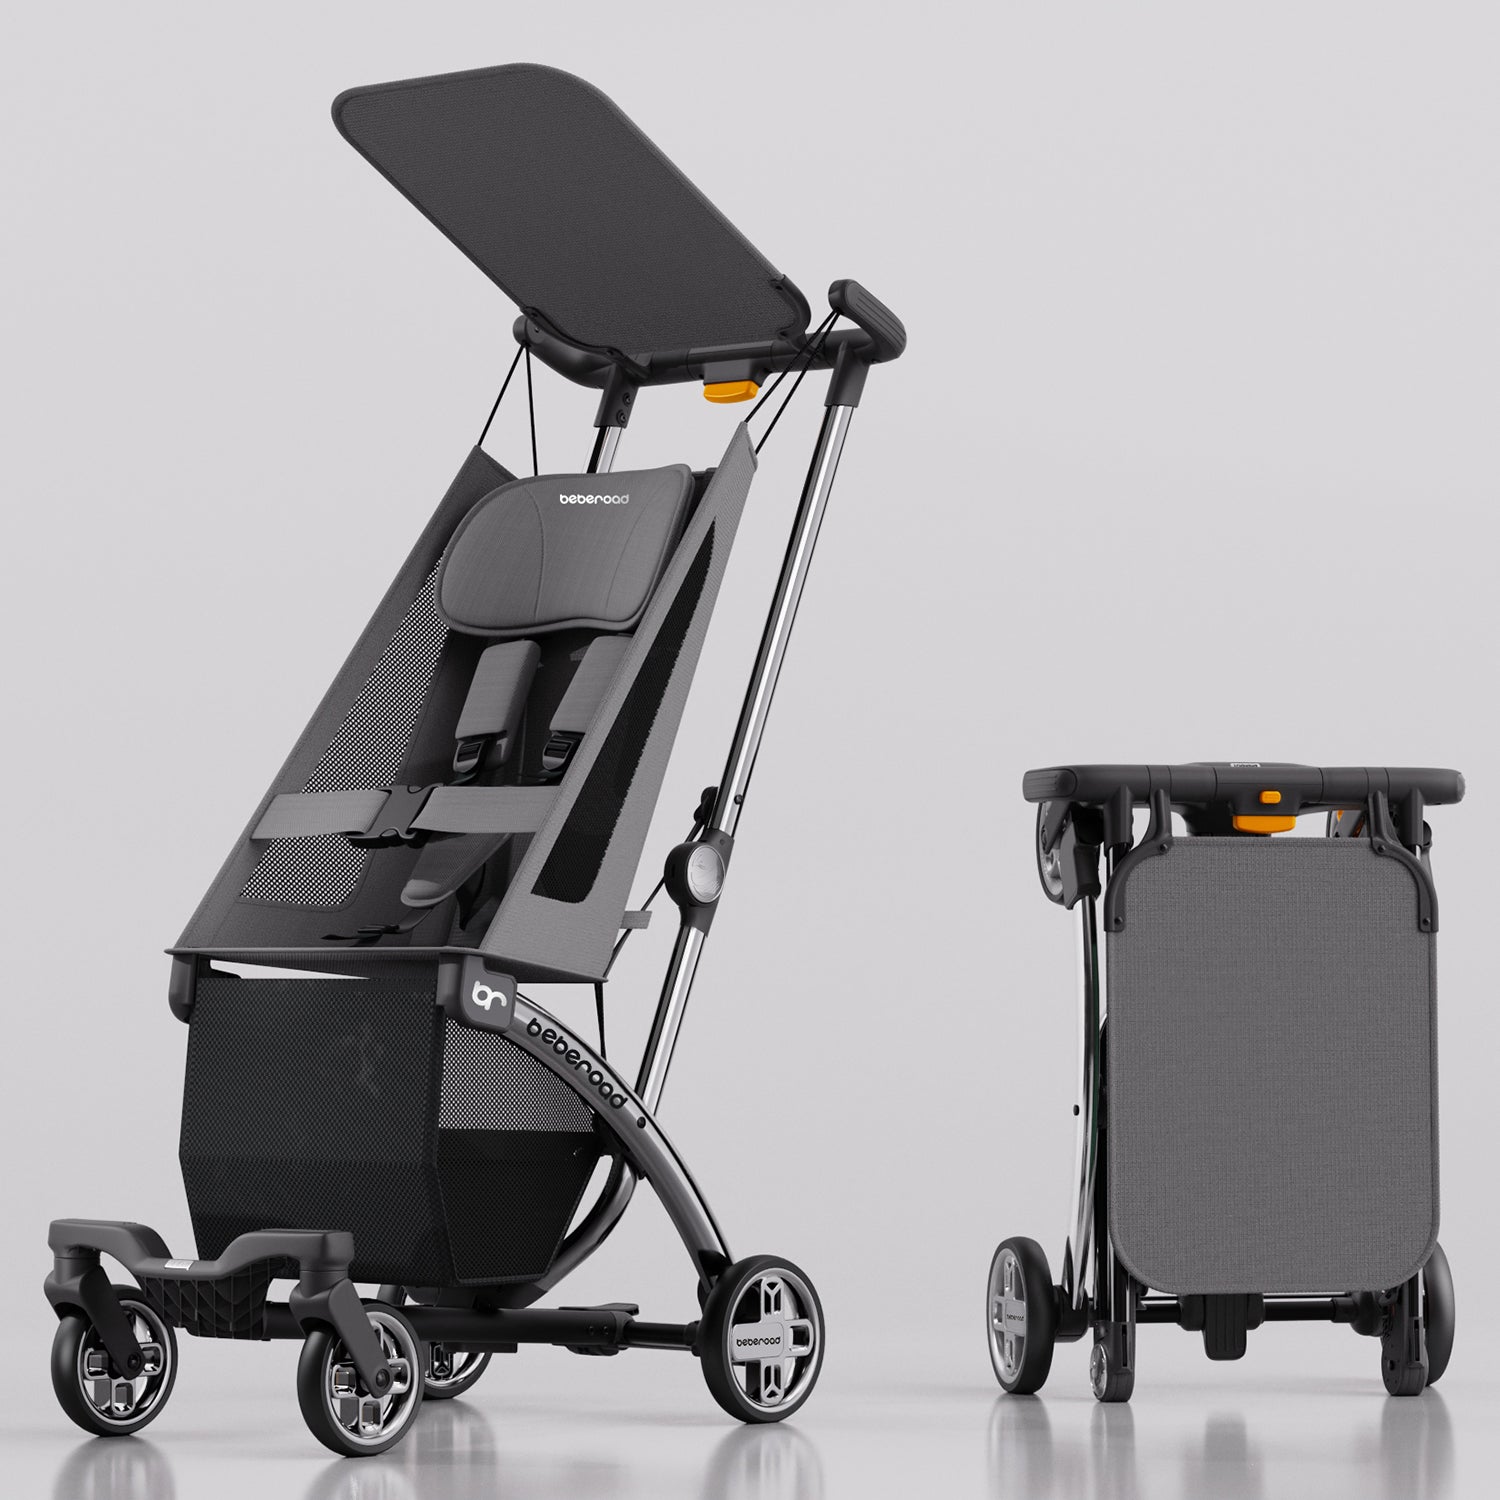 Pre-Sell: A Magic Auto Folding Travel Buggy, R1 Baby Stroller